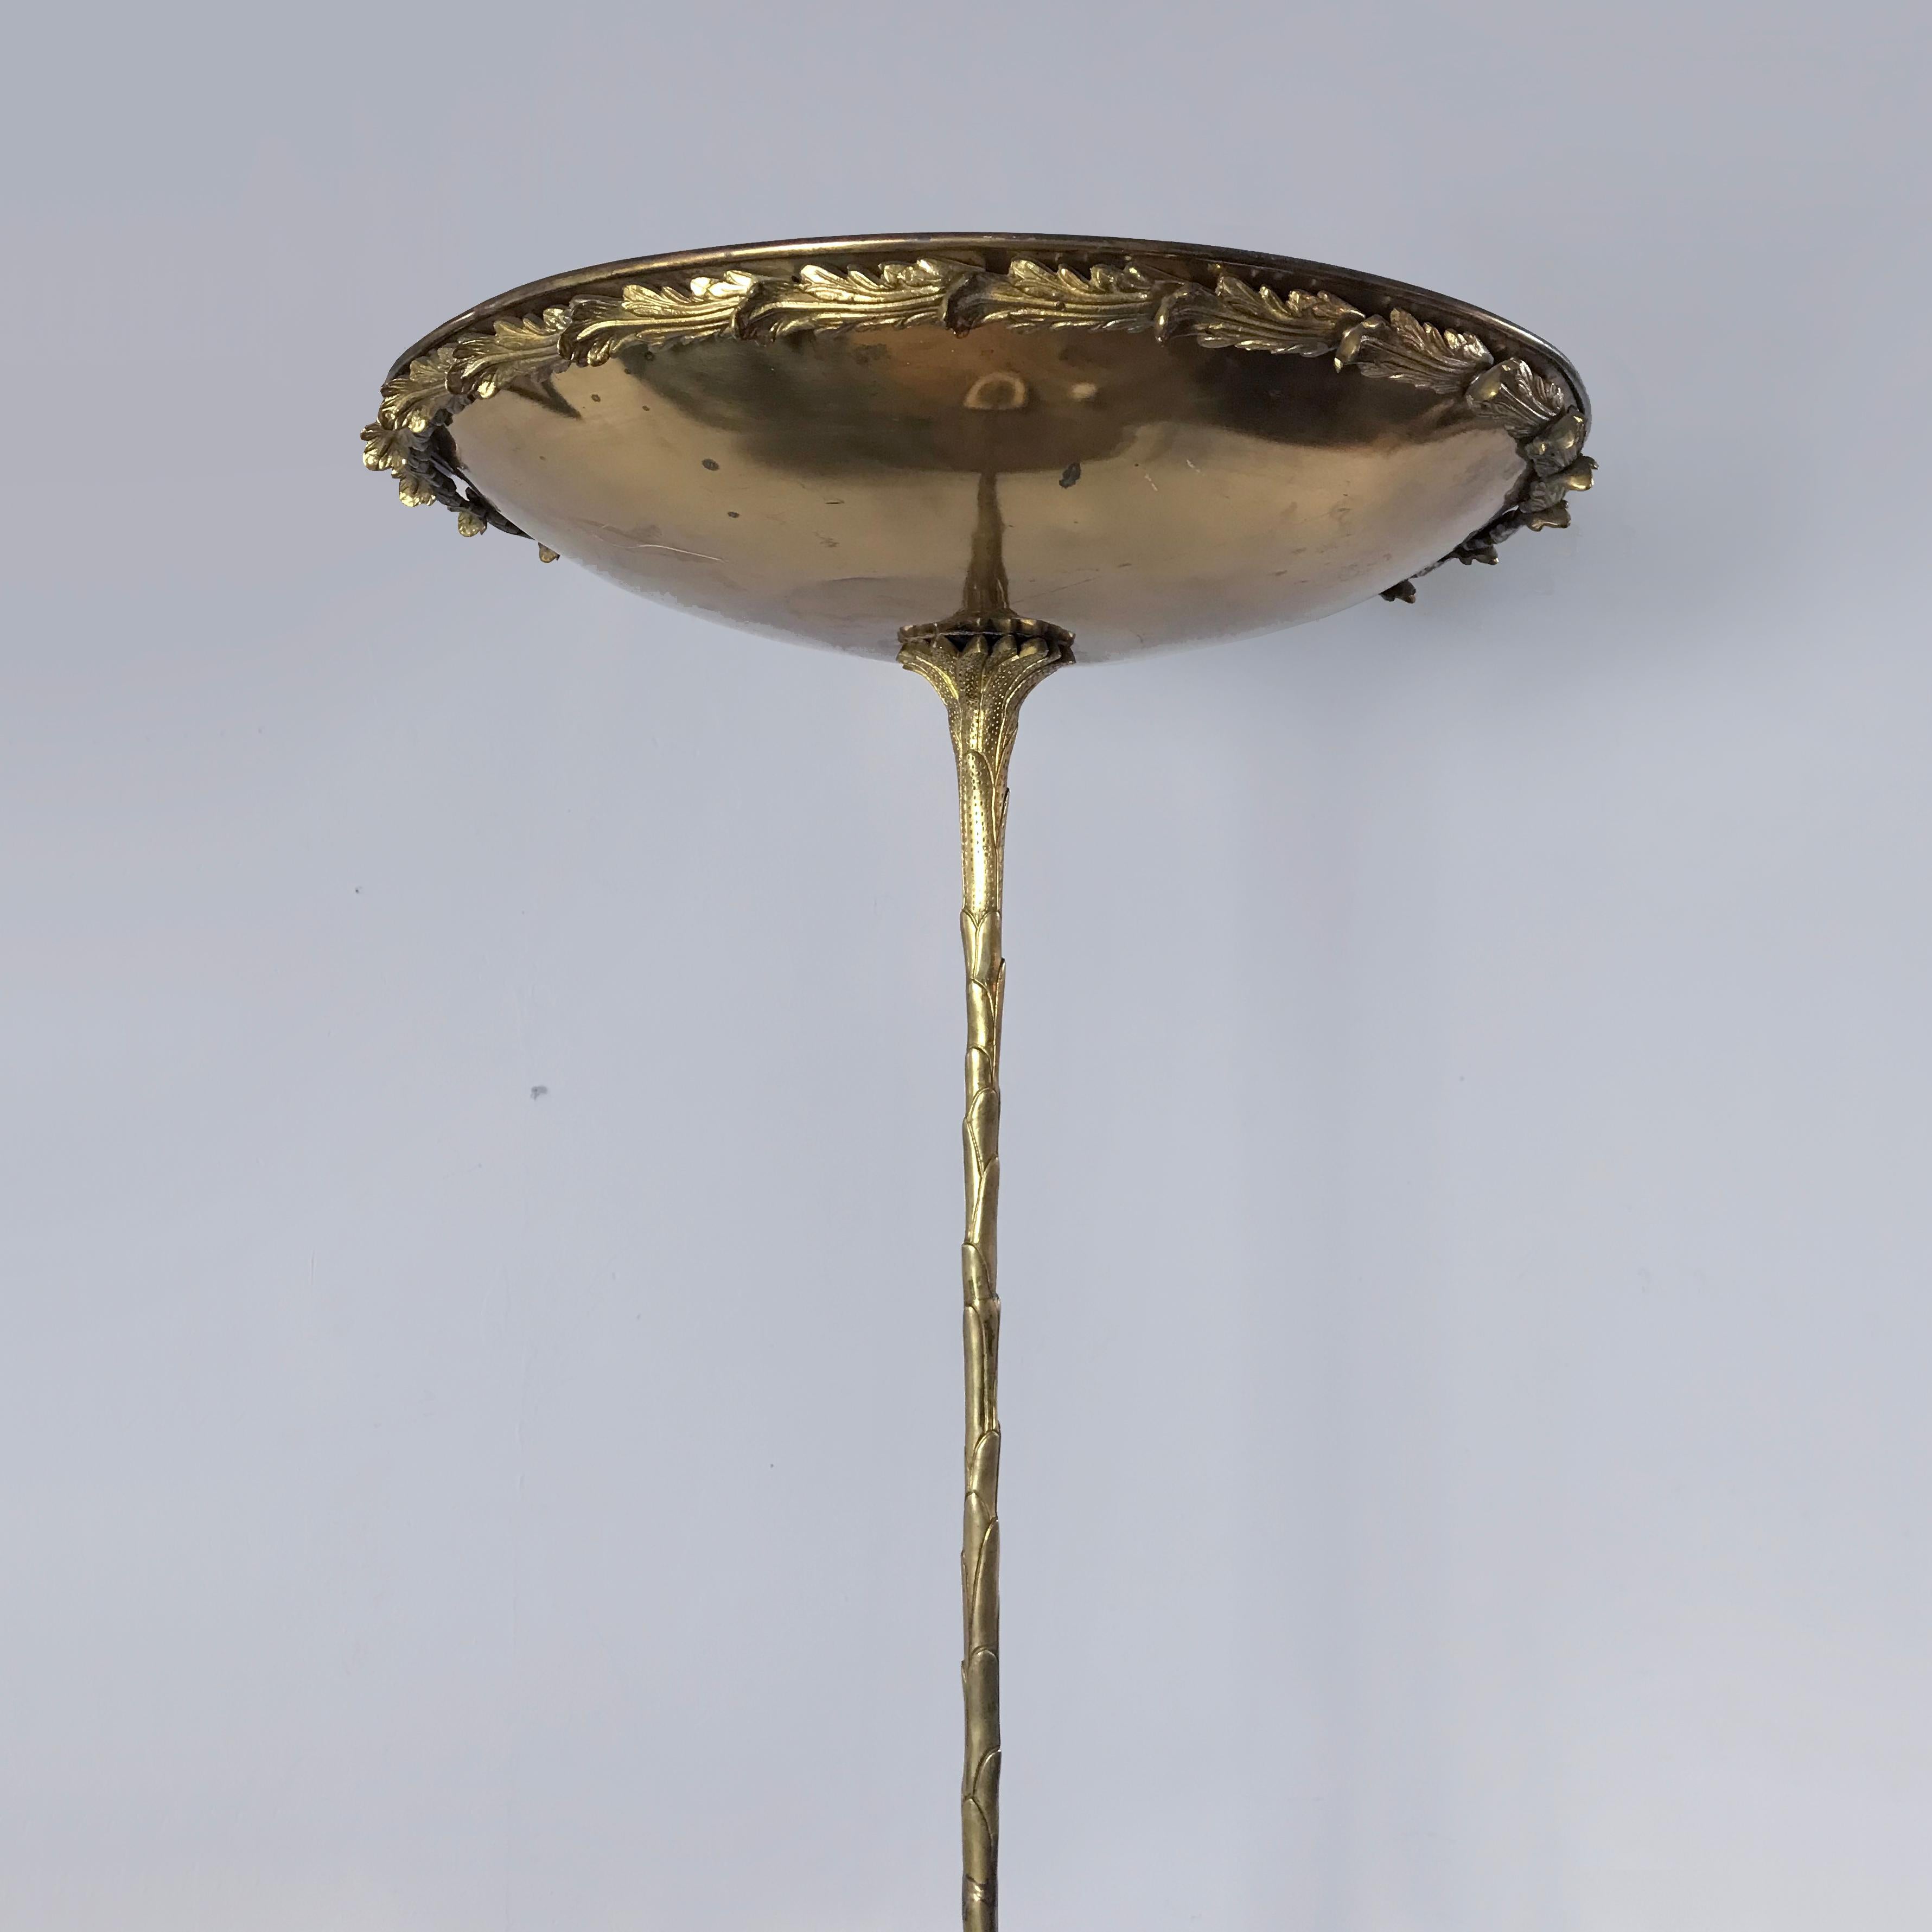 A very elegant gilt bronze Maison Bagues style uplighter.  The shallow brass dish mounted with gilt bronze leaf decoration. The slender palmette stem cast and chased sitting on a circular marble base mounted with further leaf decoration on gilt